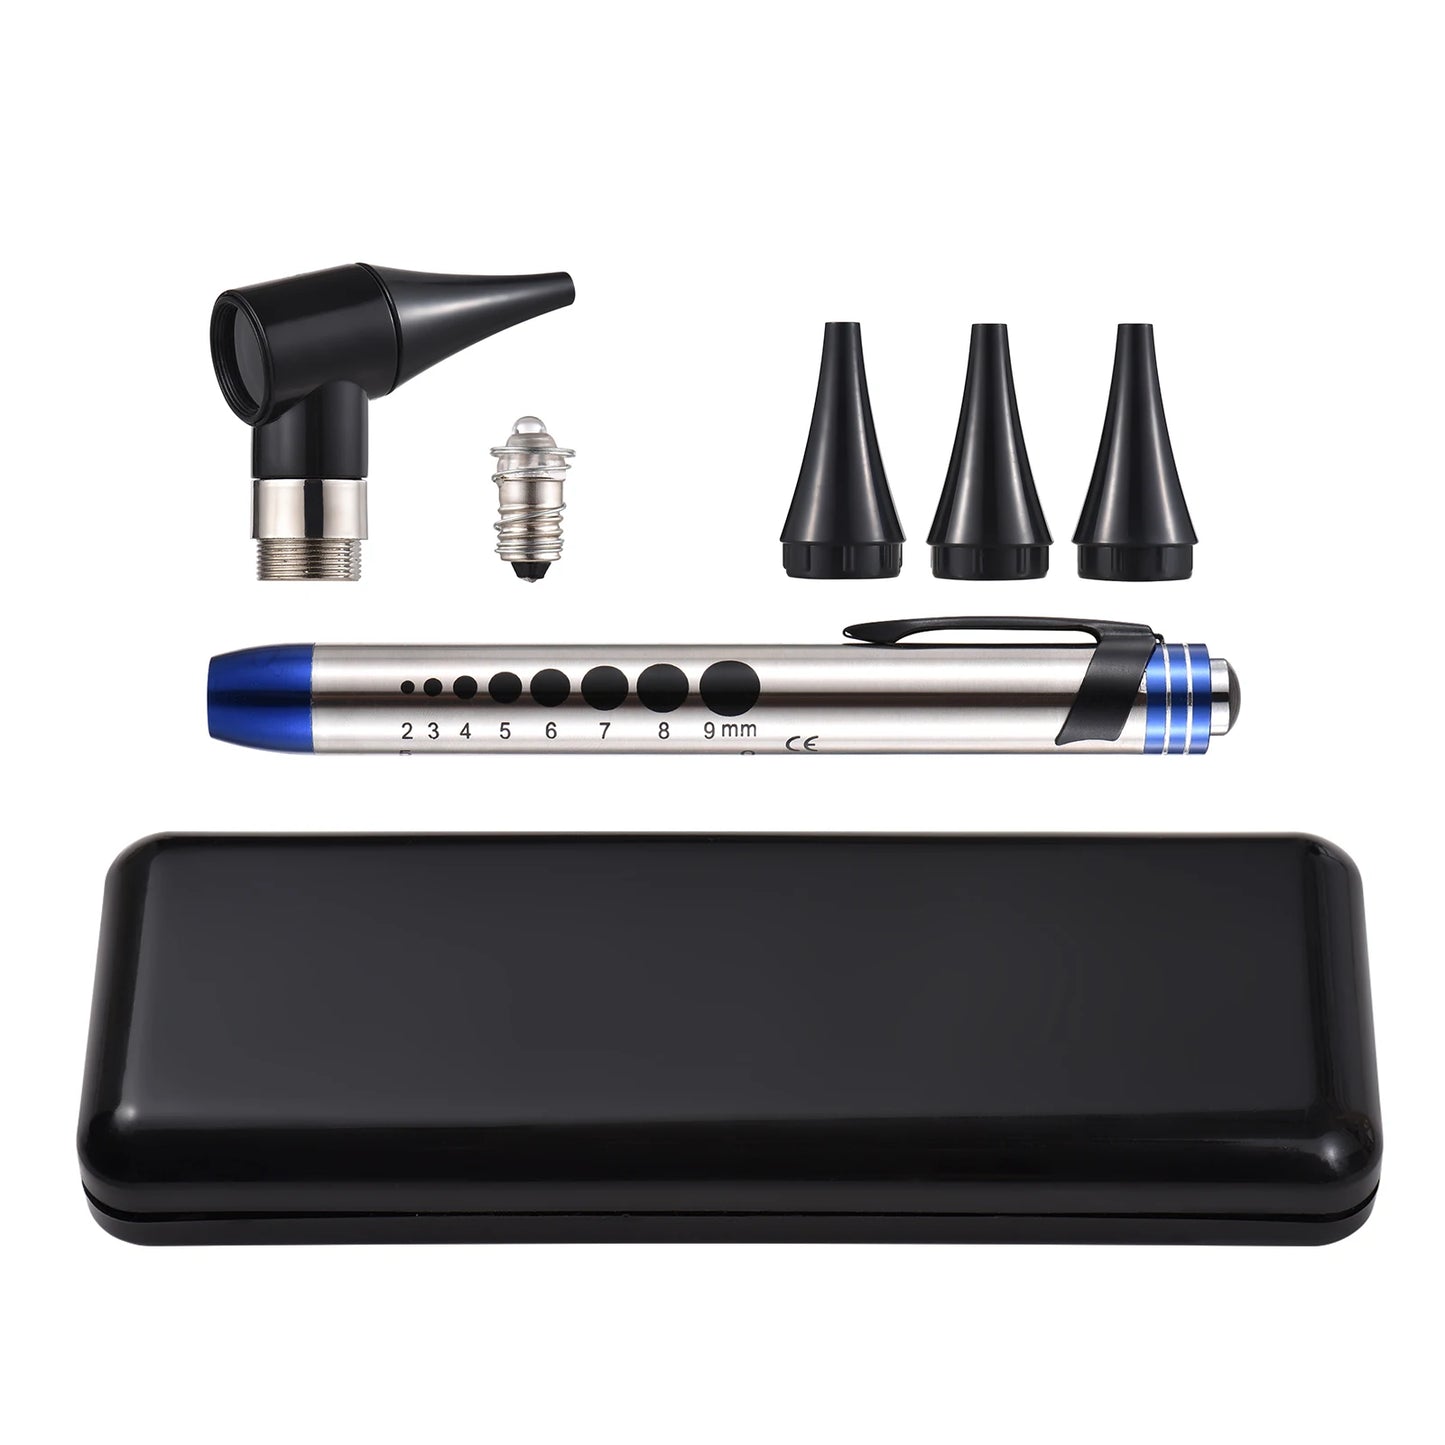 2 in 1 Otoscope and Eyes Diagnostic Tool Kit